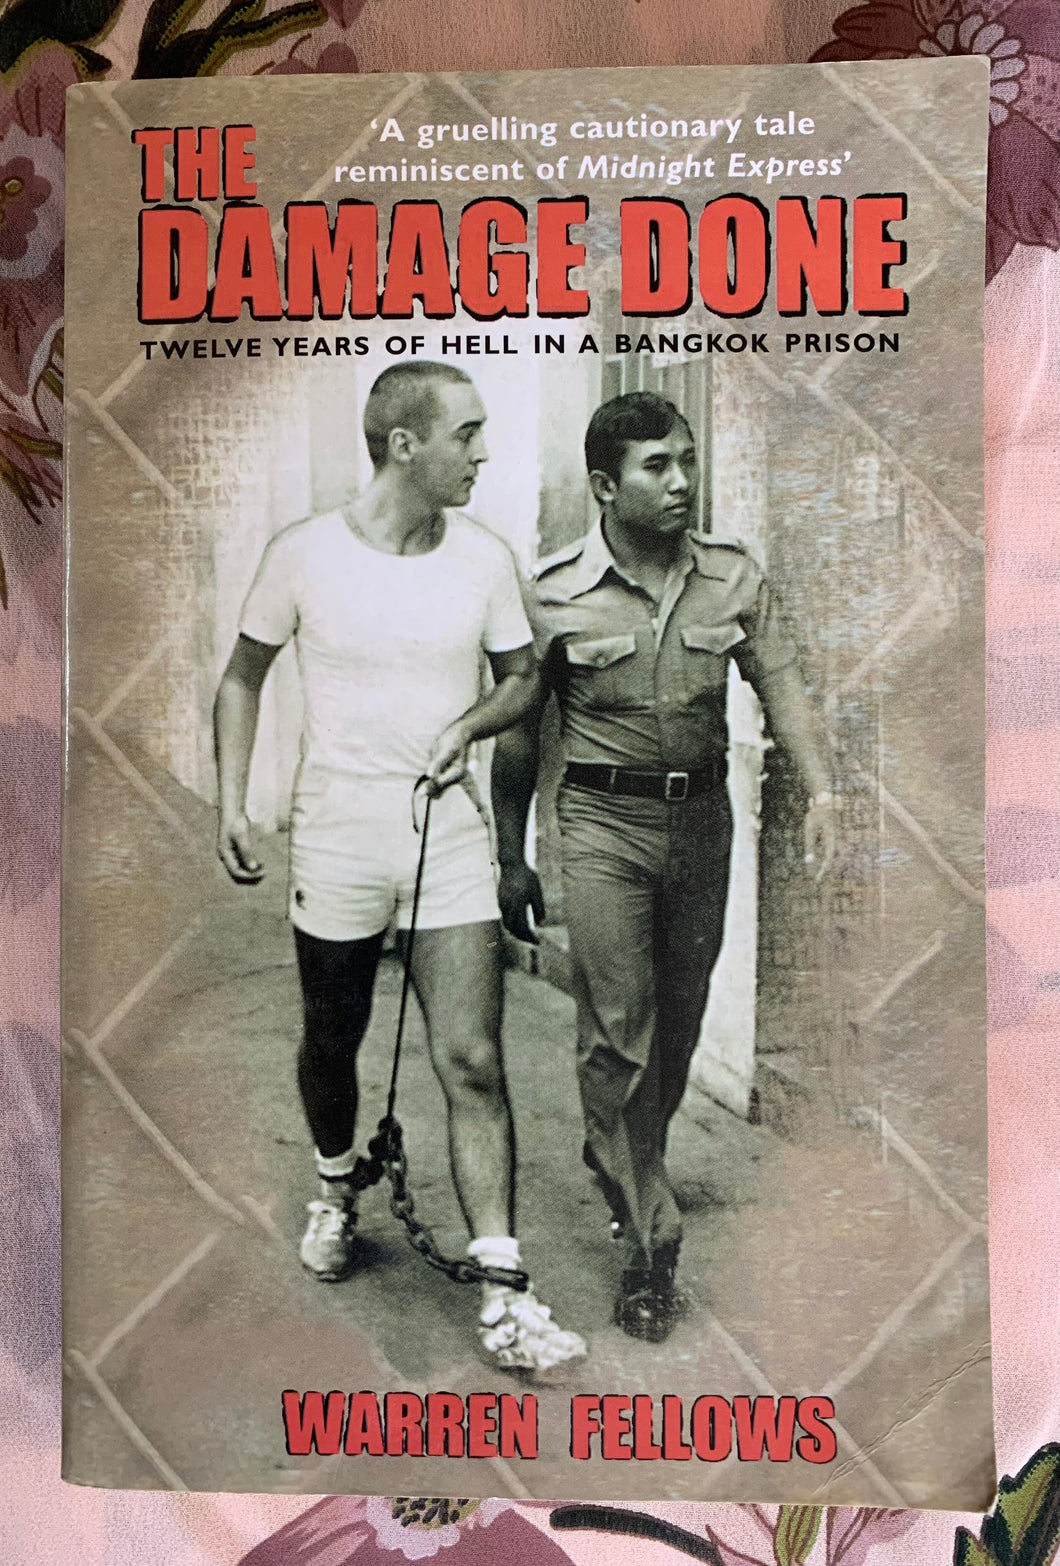 The Damage Done: Twelve Years of Hell in a Bangkok Prison